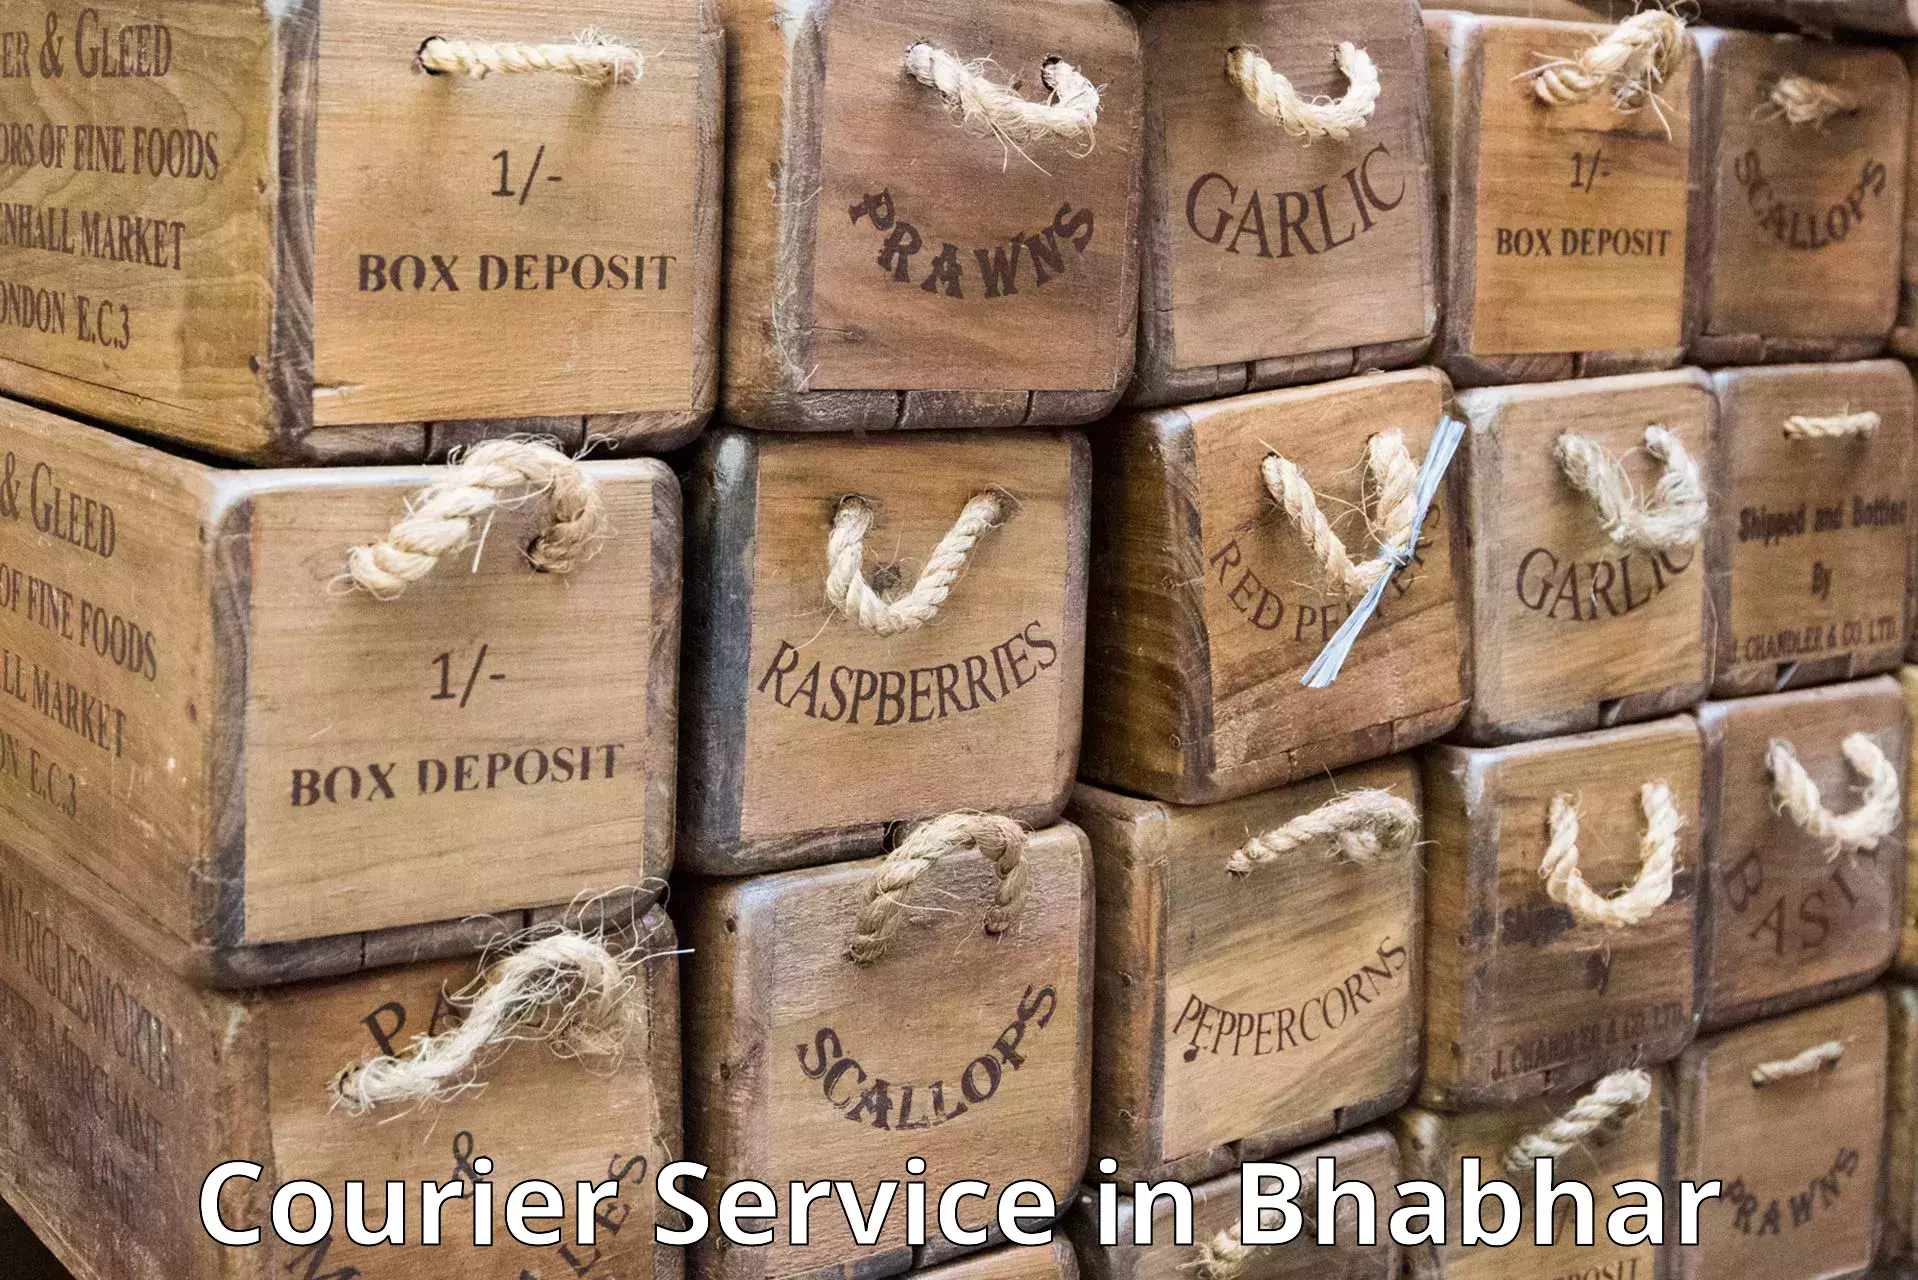 Personal parcel delivery in Bhabhar